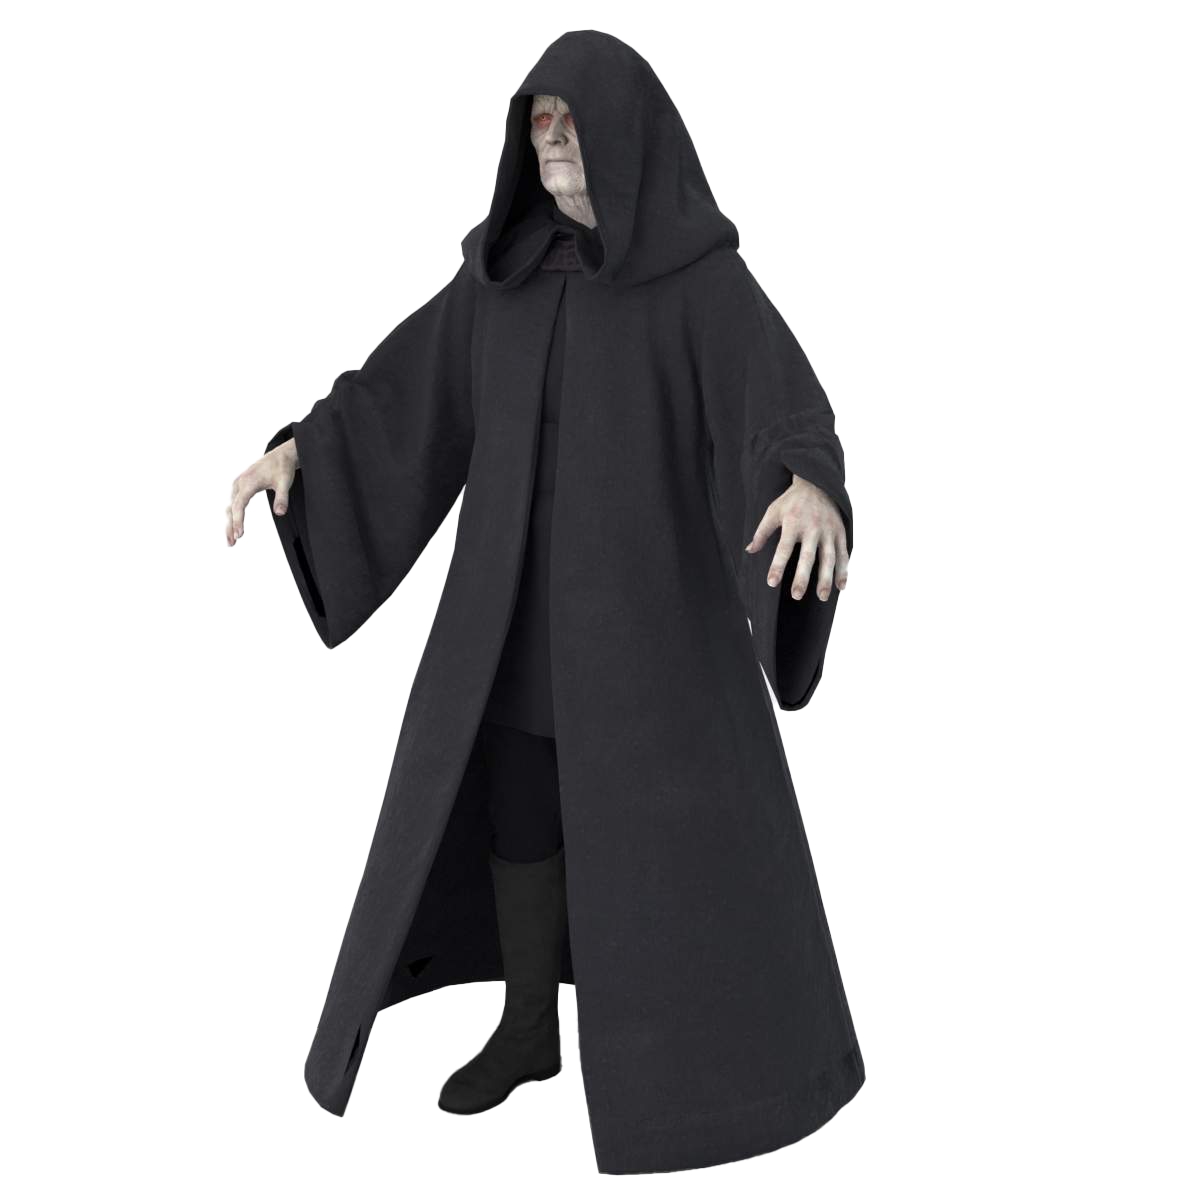 Pic Palpatine Emperor Star Wars PNG Image